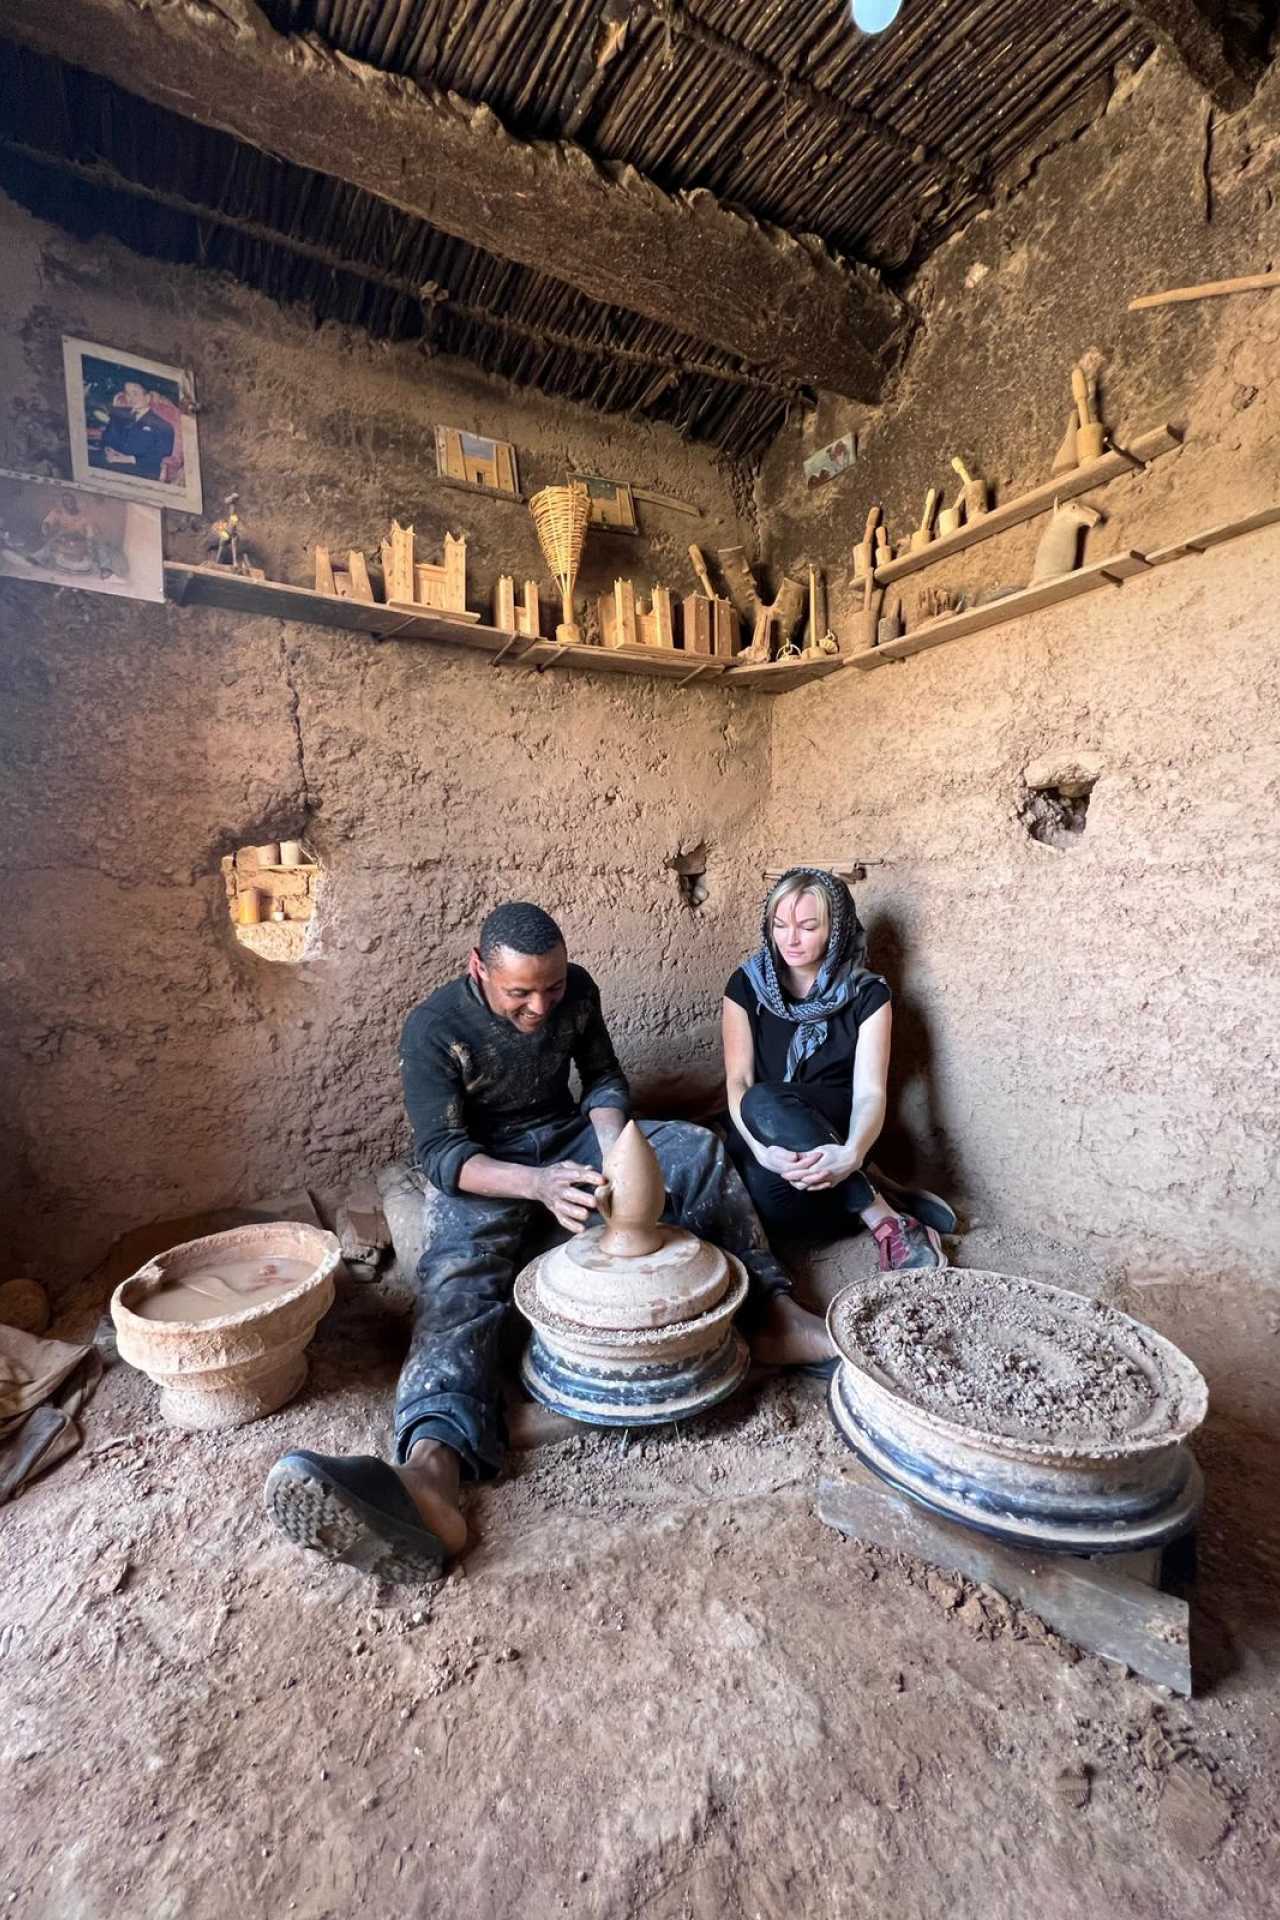 Throwing pots on the wheel